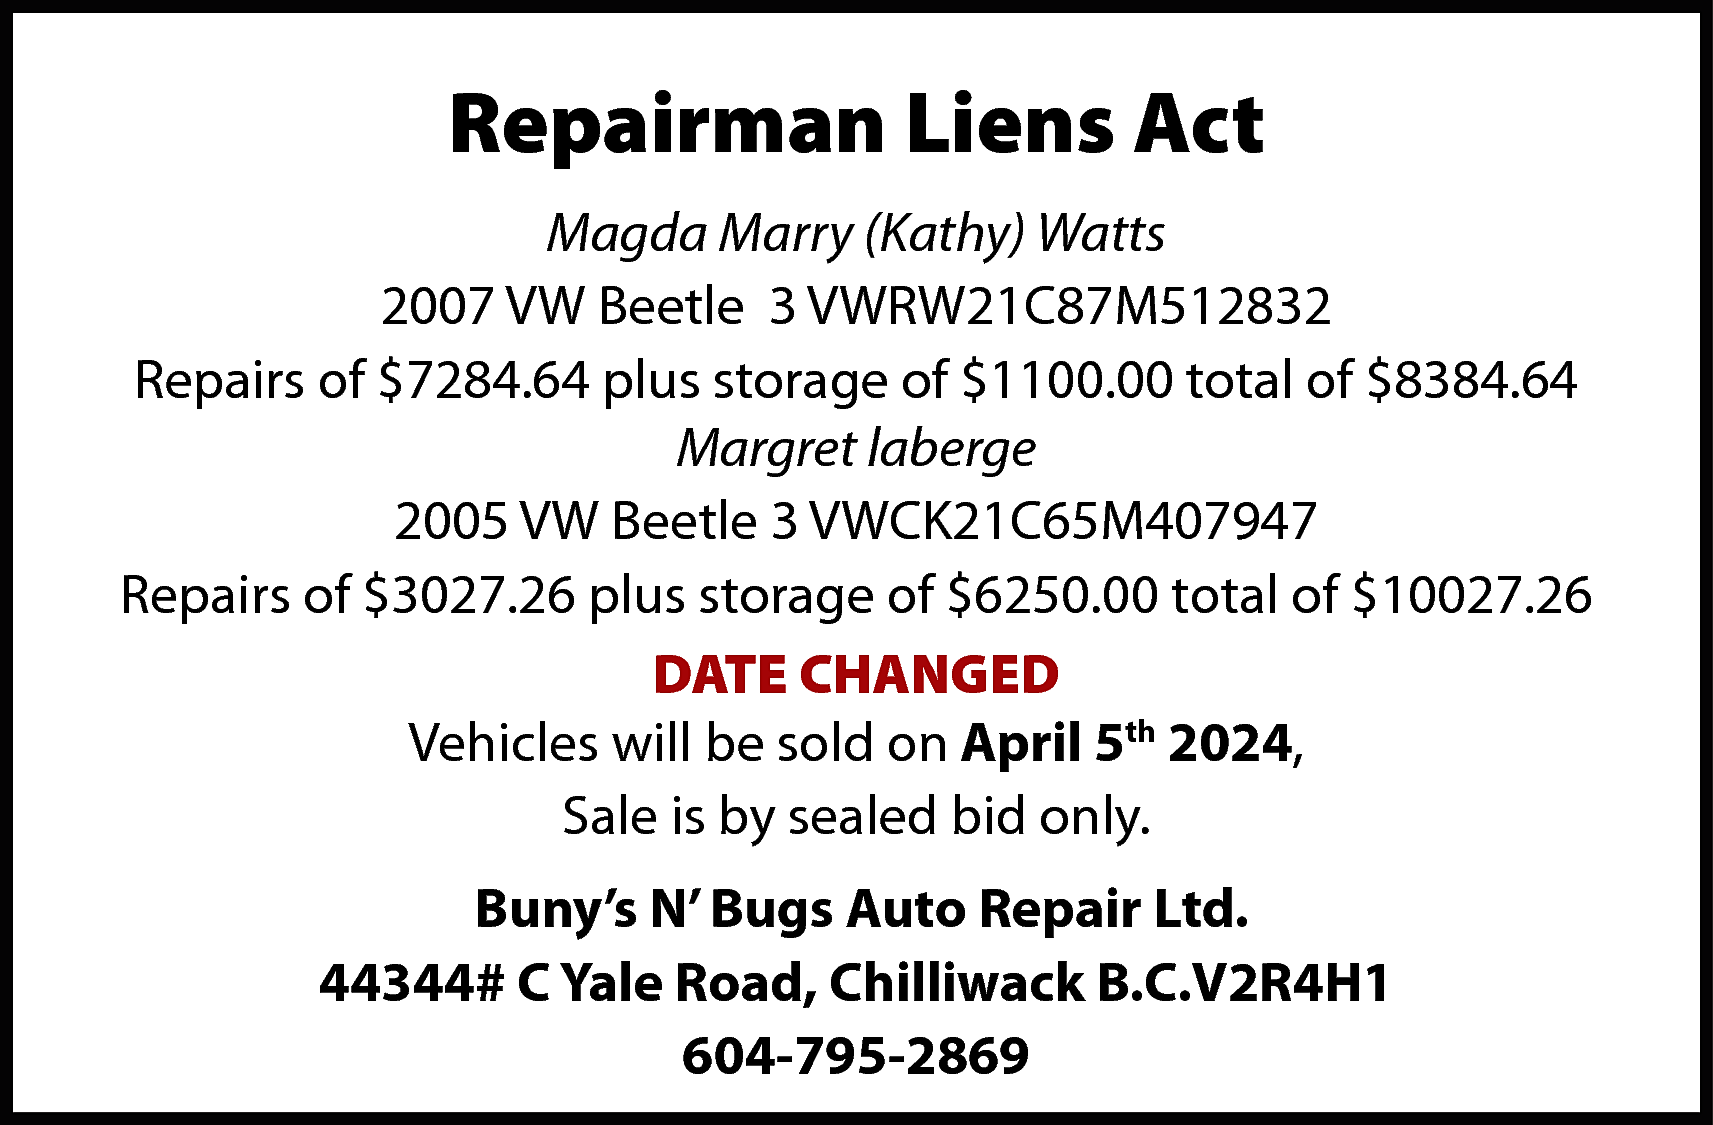 Repairman Liens Act <br>Magda Marry  Repairman Liens Act  Magda Marry (Kathy) Watts  2007 VW Beetle 3 VWRW21C87M512832  Repairs of $7284.64 plus storage of $1100.00 total of $8384.64  Margret laberge  2005 VW Beetle 3 VWCK21C65M407947  Repairs of $3027.26 plus storage of $6250.00 total of $10027.26  DATE CHANGED  Vehicles will be sold on April 5th 2024,  Sale is by sealed bid only.  Buny’s N’ Bugs Auto Repair Ltd.  44344# C Yale Road, Chilliwack B.C.V2R4H1  604-795-2869    